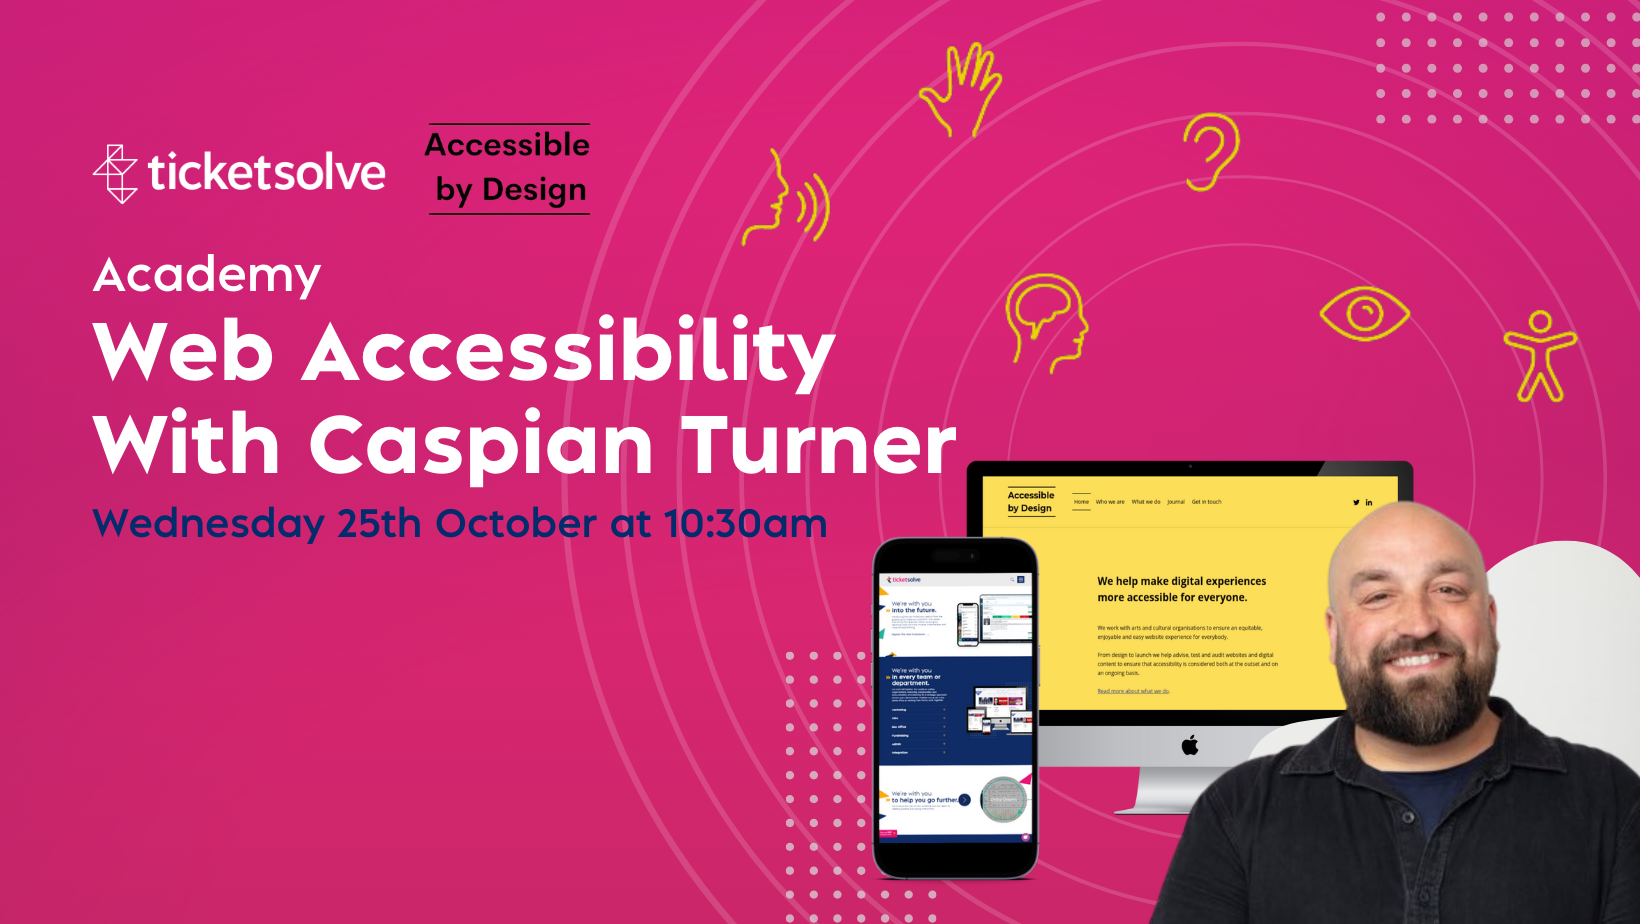 On a pink background, the words: Ticketsolve Accessible by Design Academy, Web Accessibility with Caspian Turner, Wednesday 25th October at 10:30am. On the right there is an image of Caspian, who is a white man with a beard wearing a dark shirt, in front of a computer screen displaying the Accessible by Design Website and a phone displaying the Ticketsolve website, surrounded my icons representing accessibility. 